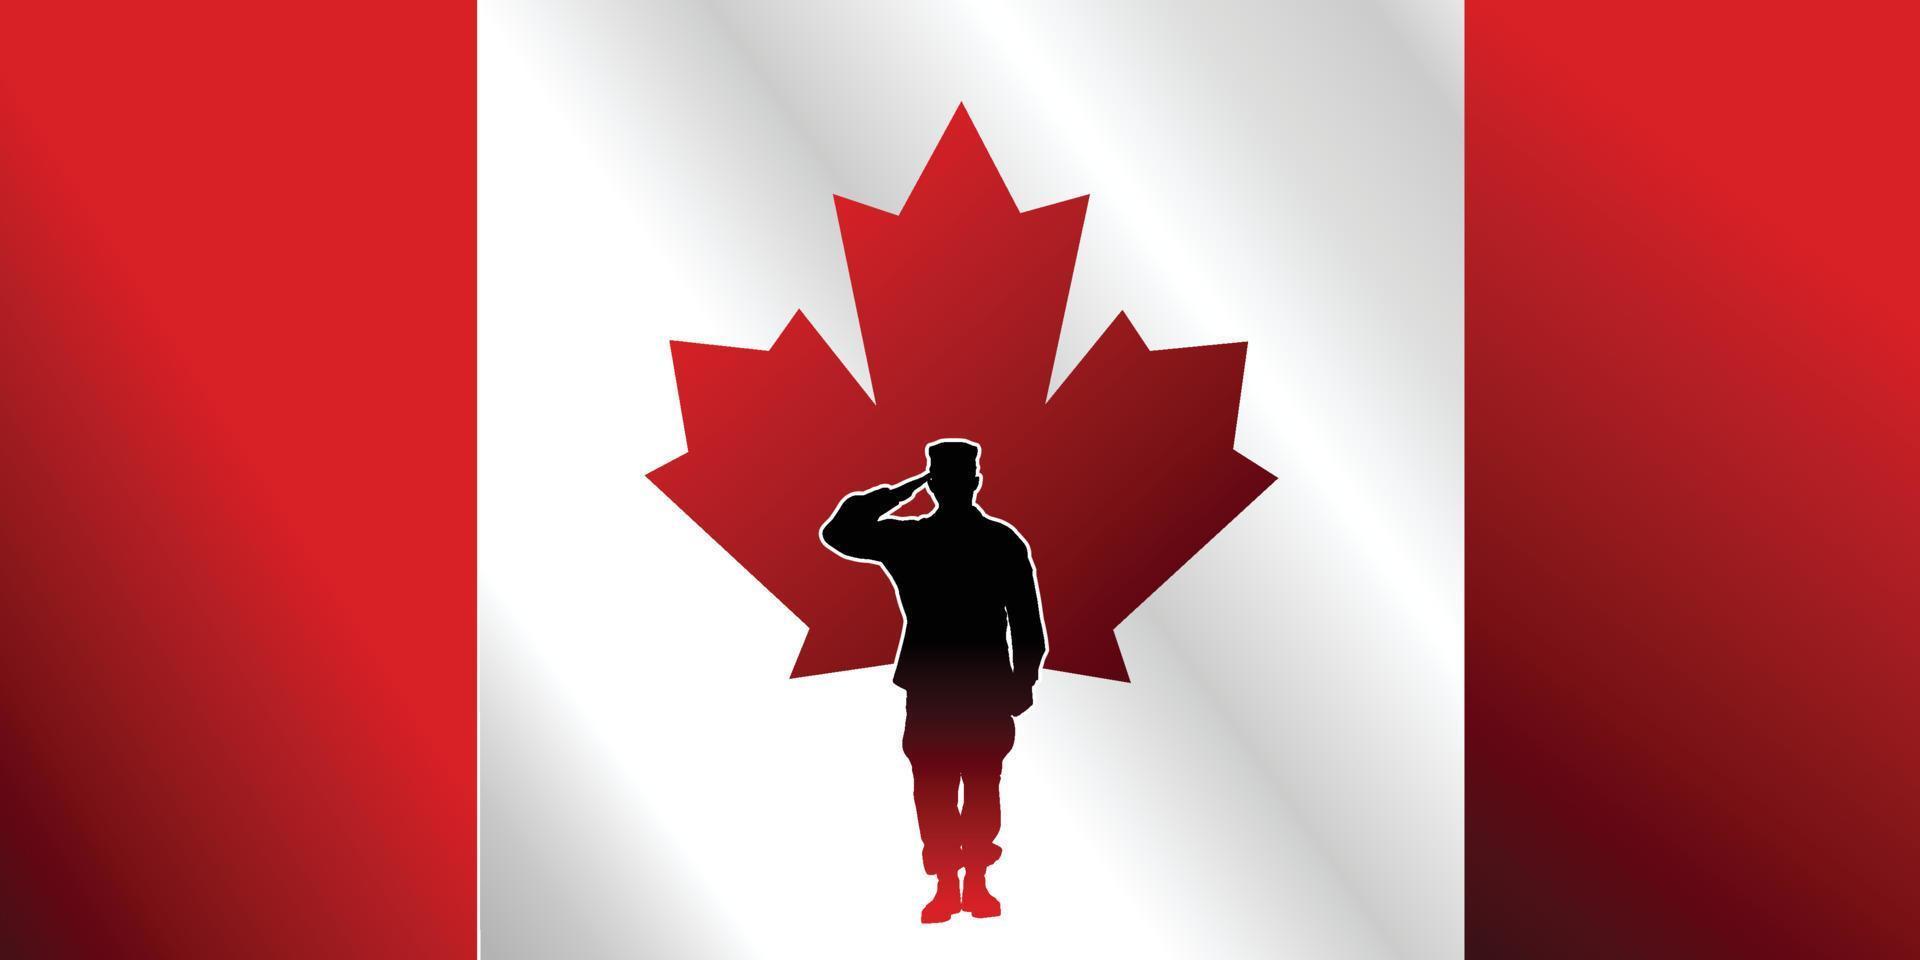 Poster design for Canada, Proud Canadian soldiers saluting, Maple leaf, and flag icon on a red background. The Canadian flag and the silhouette of the soldiers vector